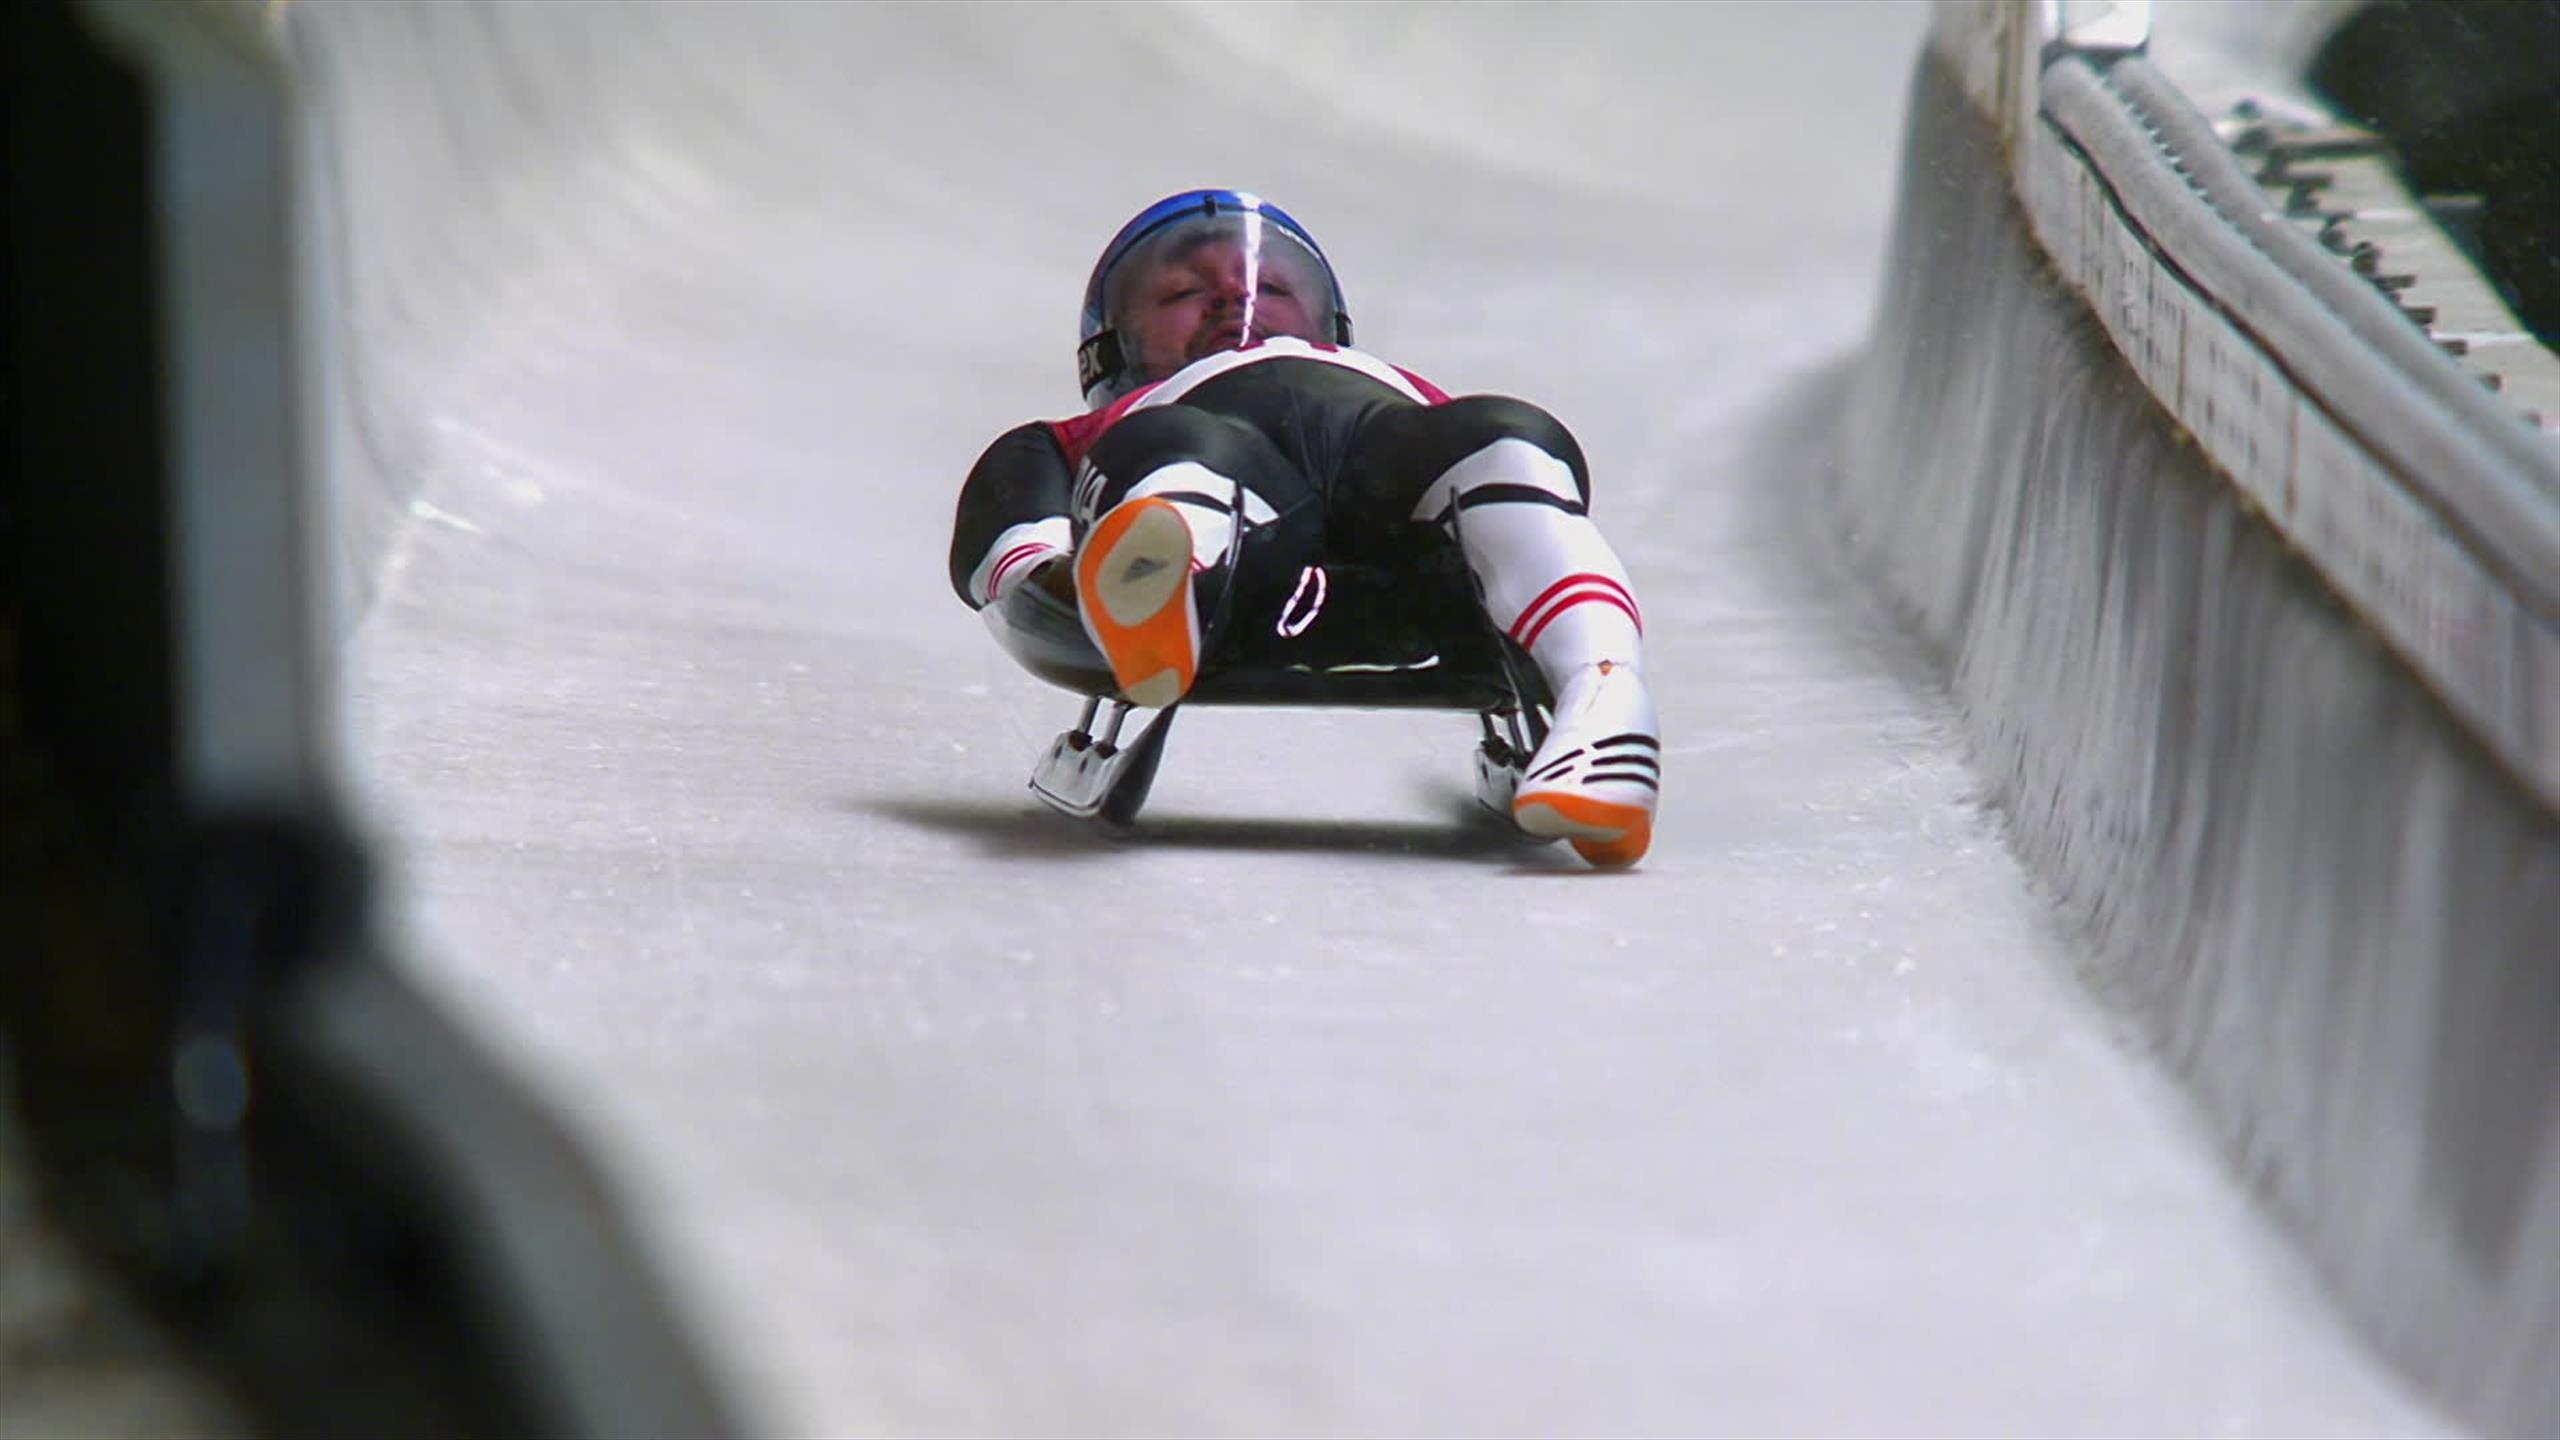 Luge: Amy Williams, A British former skeleton racer and Olympic gold medalist. 2560x1440 HD Wallpaper.